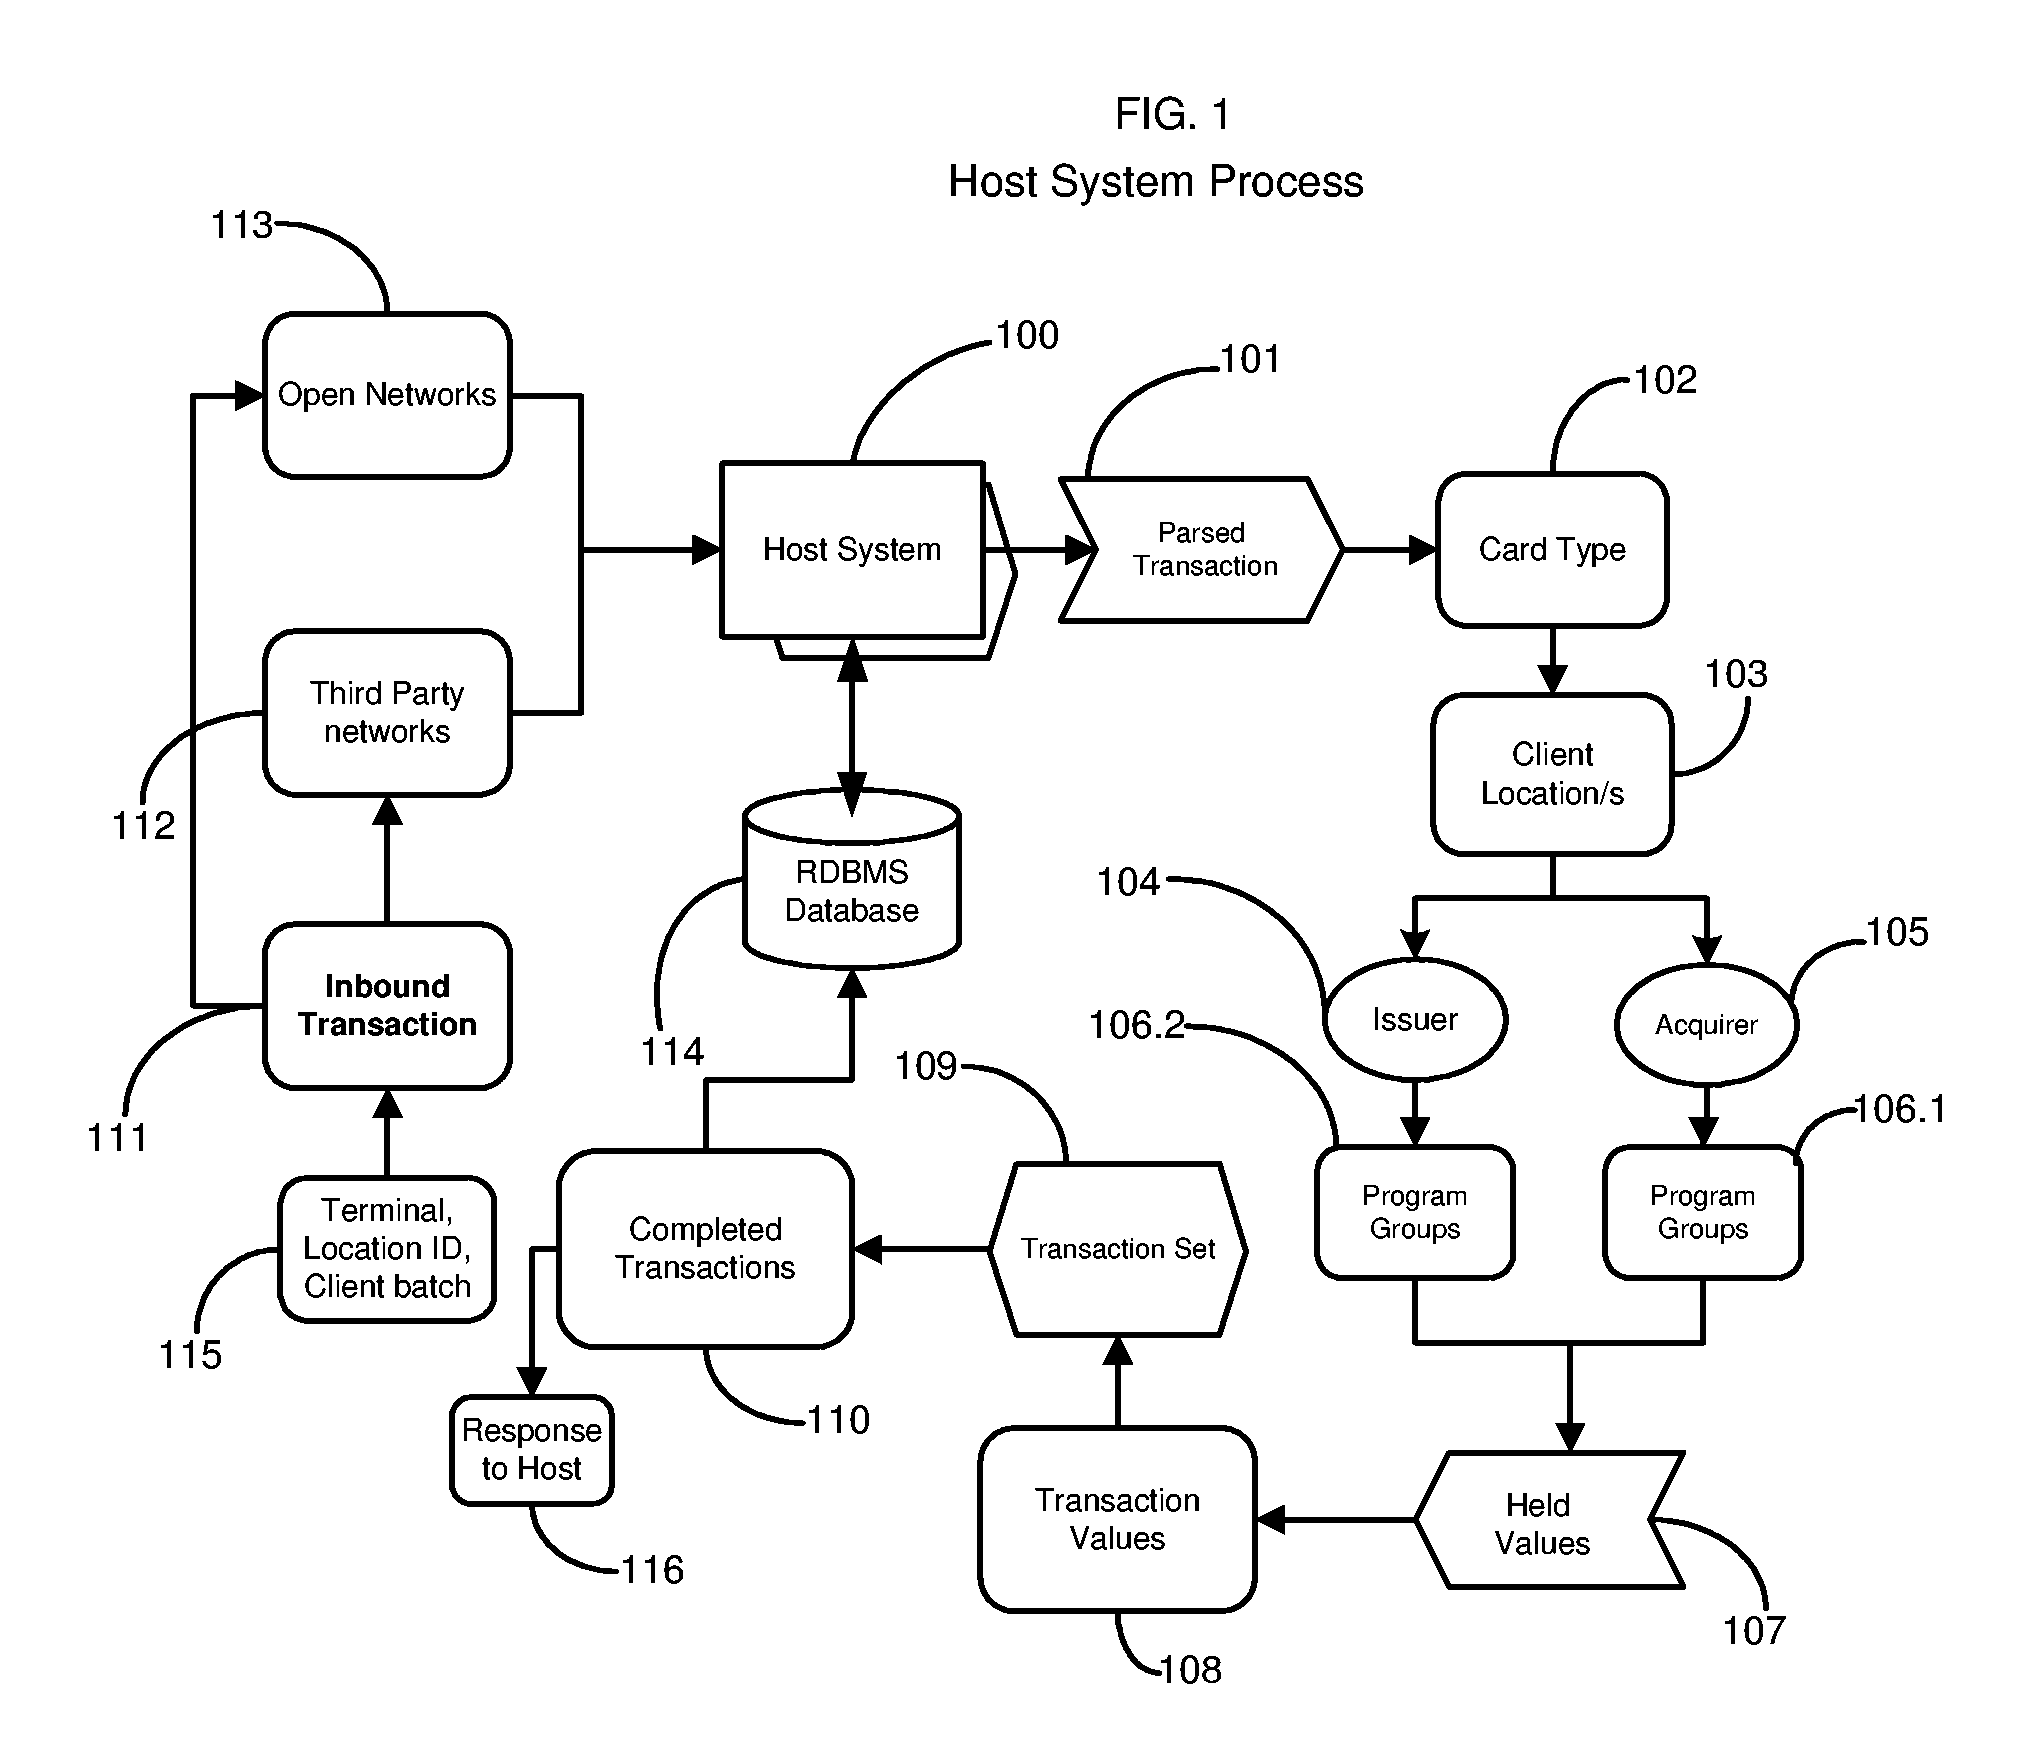 Methods and Systems for Managing Card Programs and Processing Card Transactions